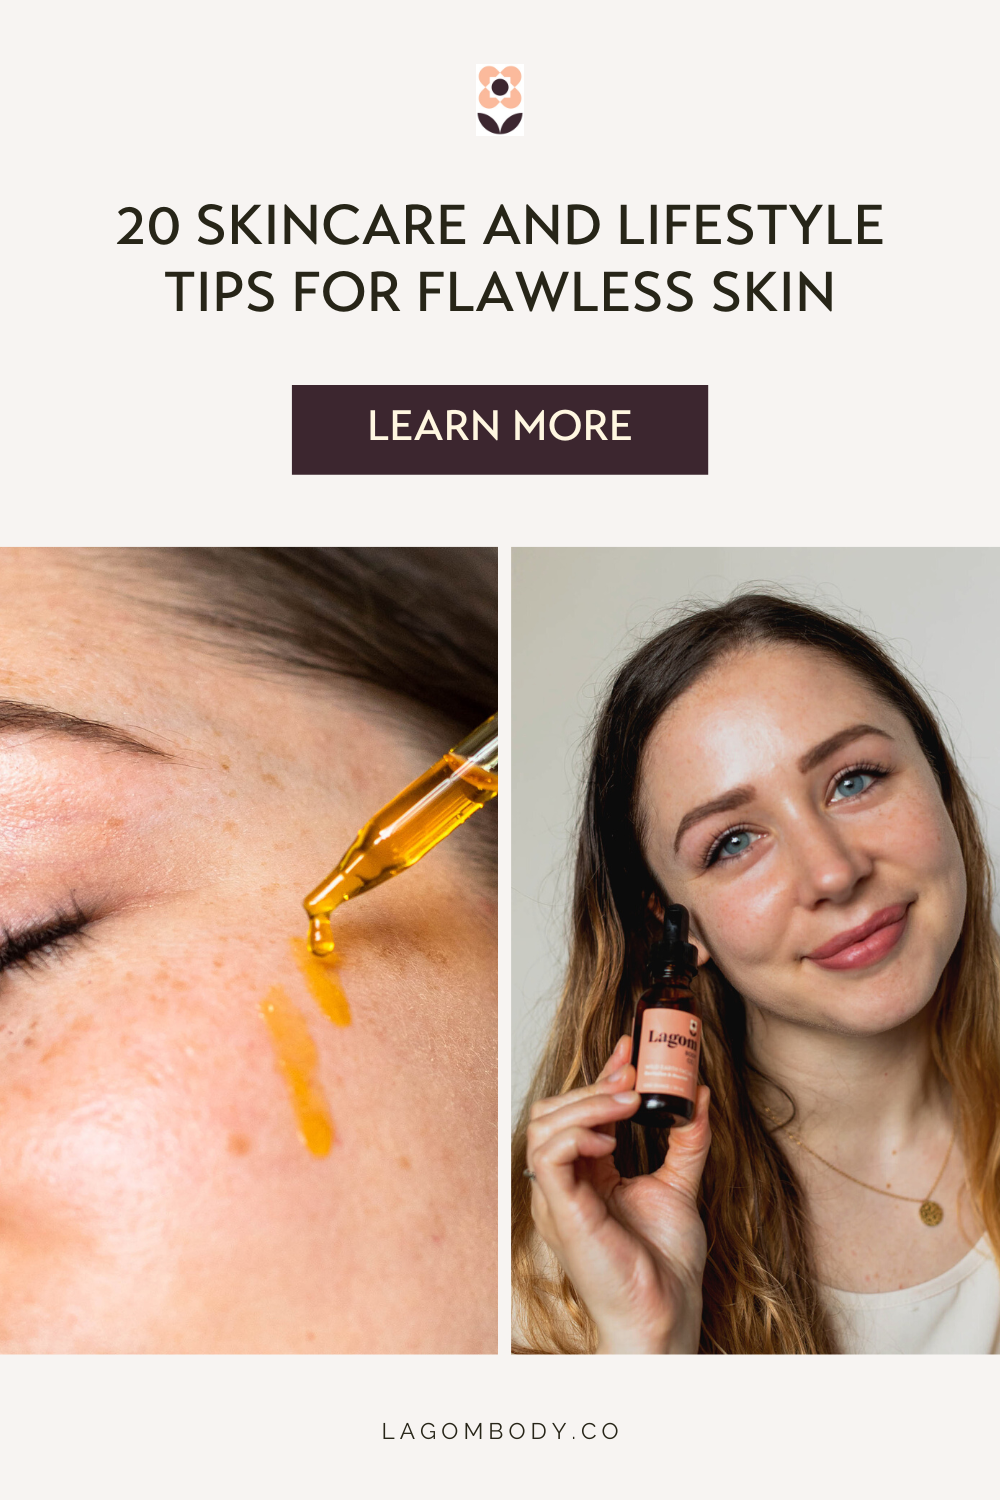 20 Skin and Lifestyle Tips for Flawless Skin